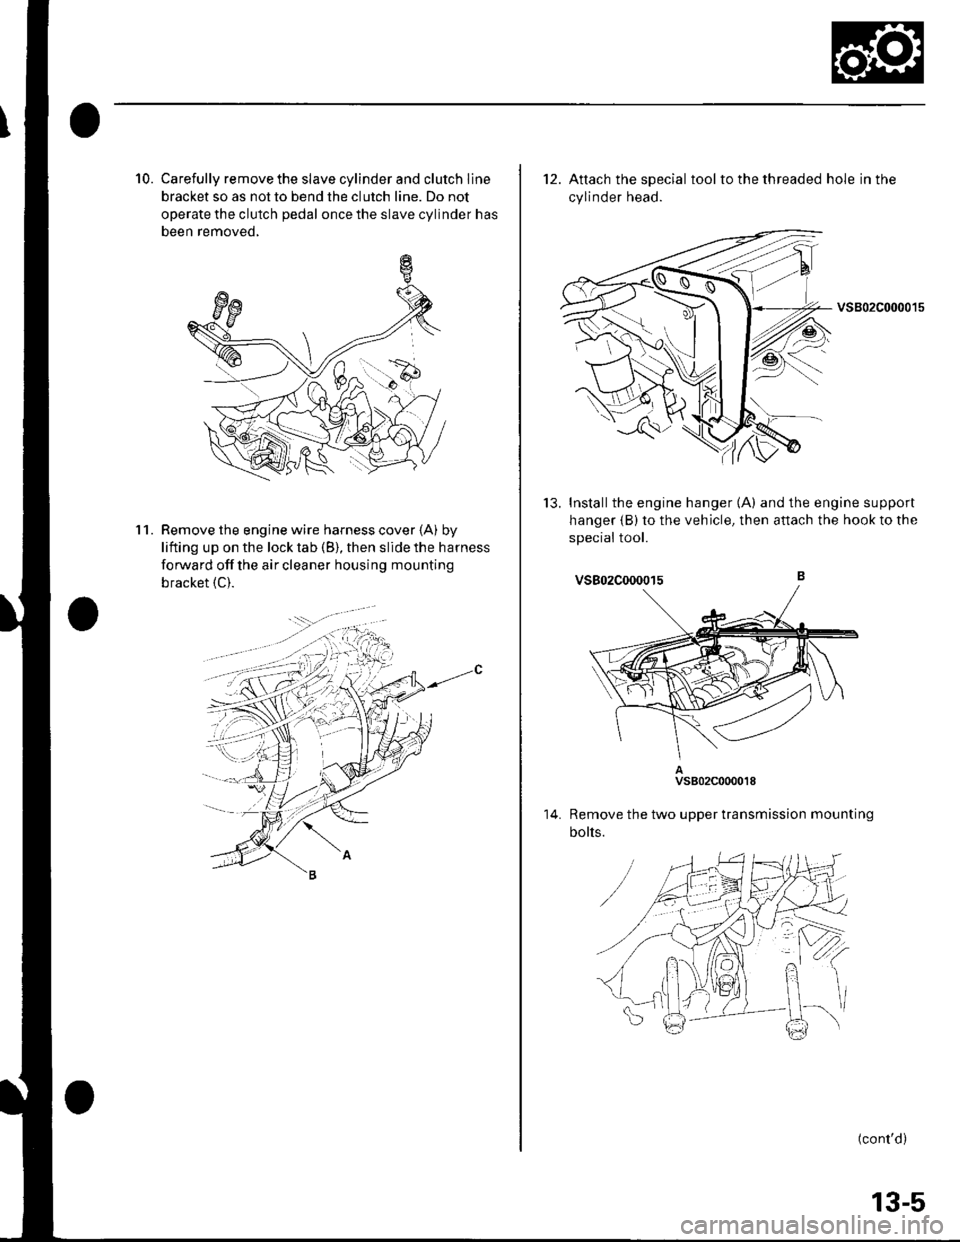 HONDA CIVIC 2002 7.G Owners Guide 10. Carefully remove the slave cylinder and clutch line
bracket so as not to bend the clutch line. Do not
operate the clutch pedal once the slave cylinder has
been removed,
Remove the engine wire harn